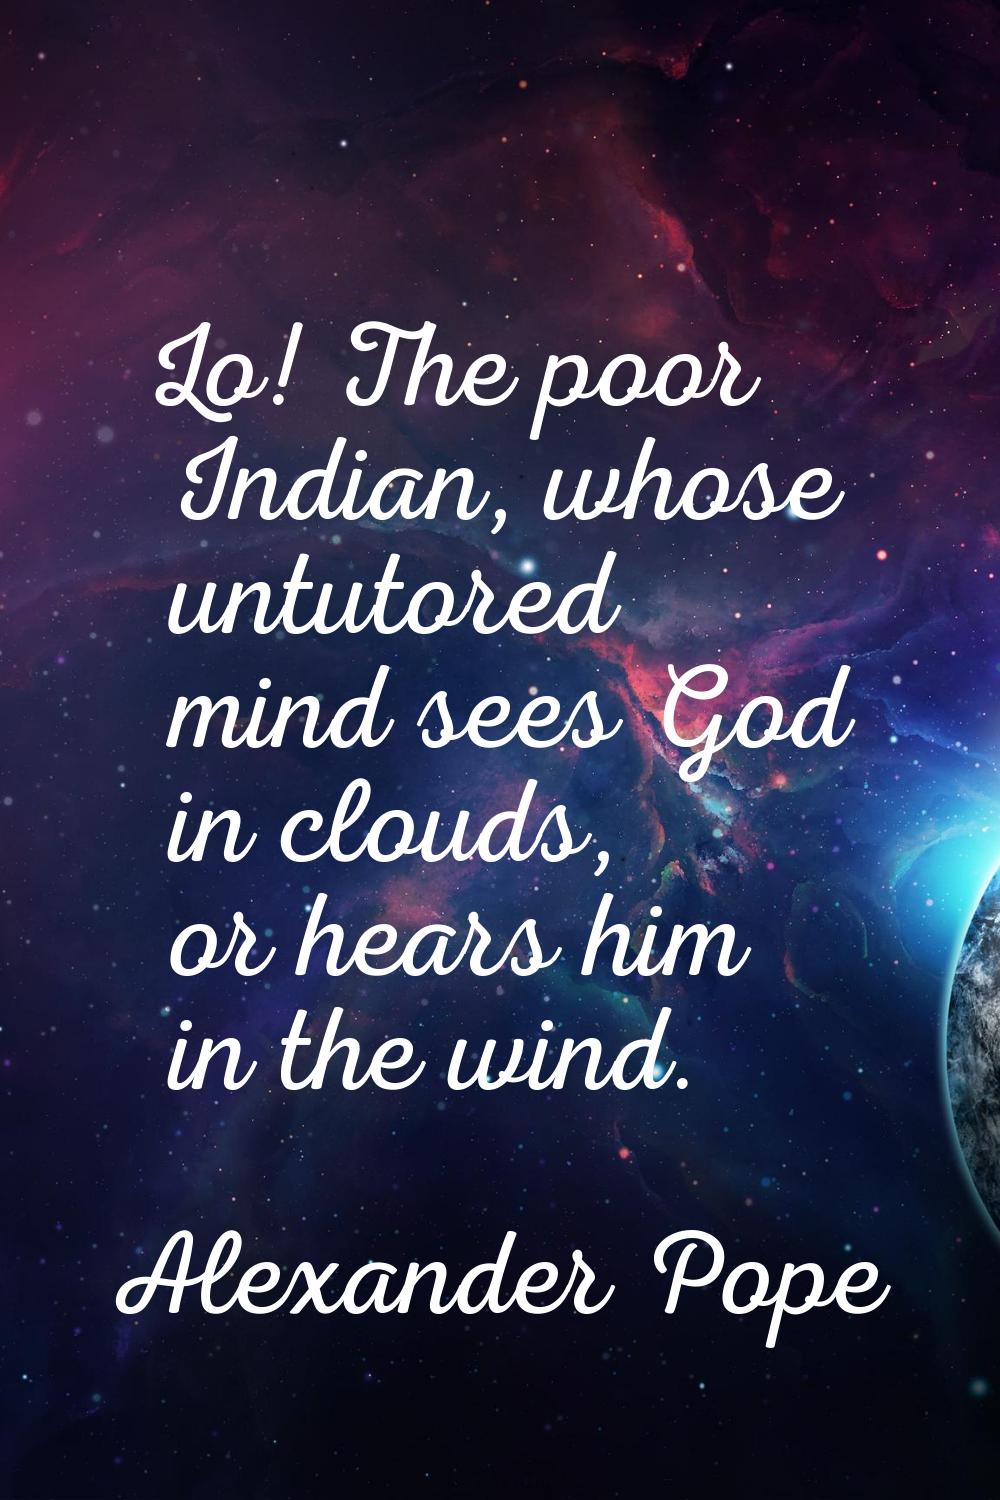 Lo! The poor Indian, whose untutored mind sees God in clouds, or hears him in the wind.